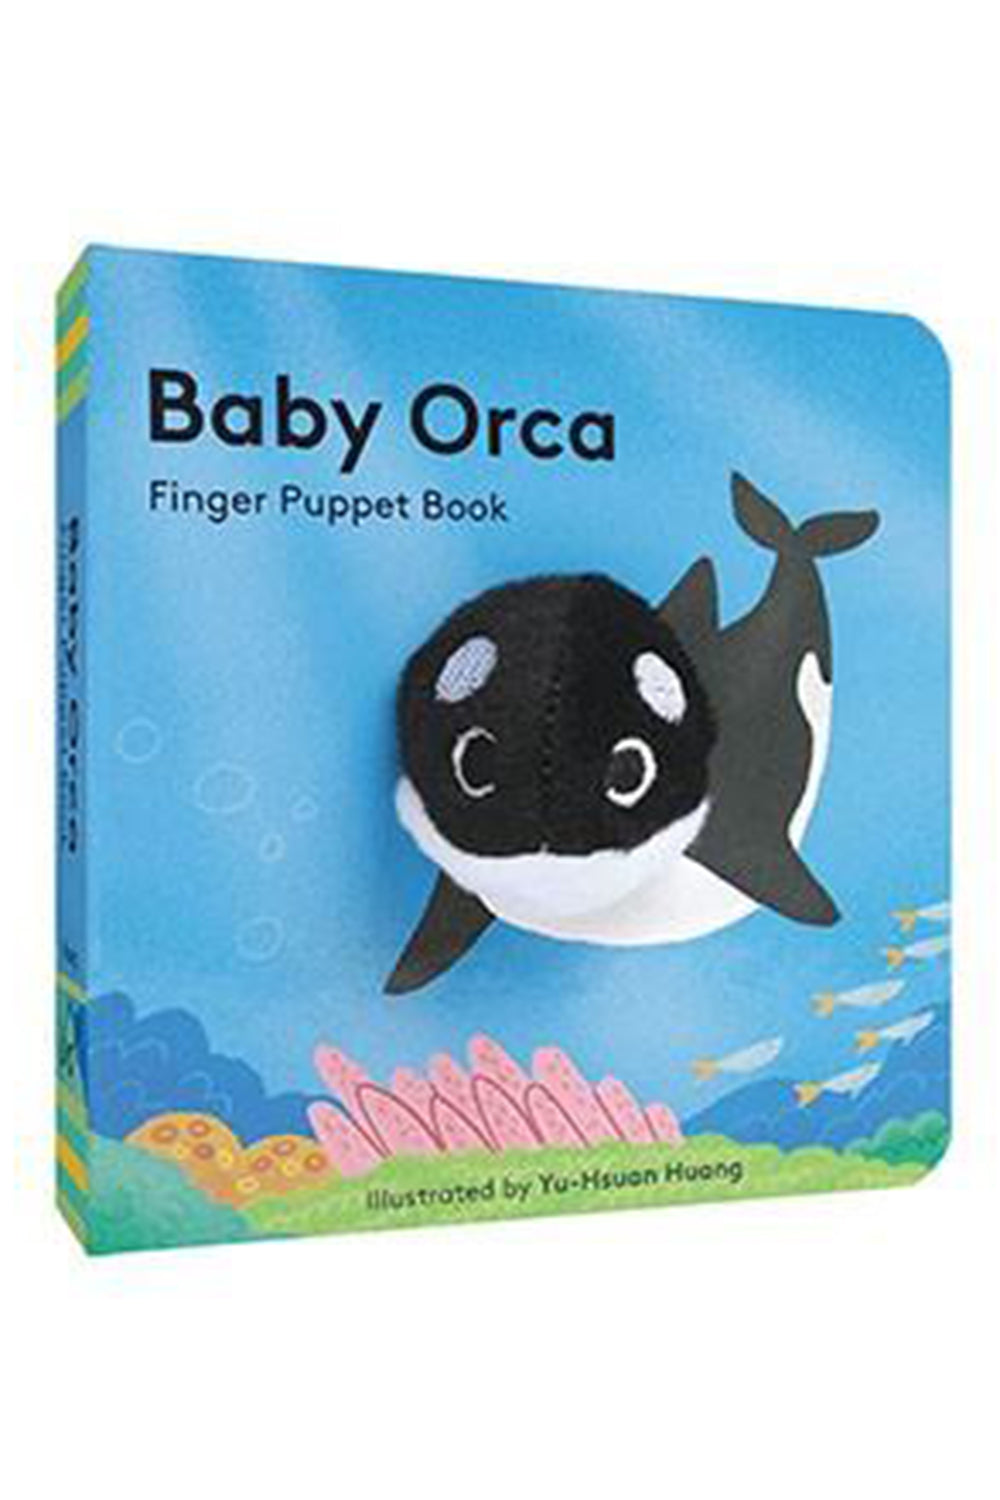 Finger Puppet Book - Baby Orca